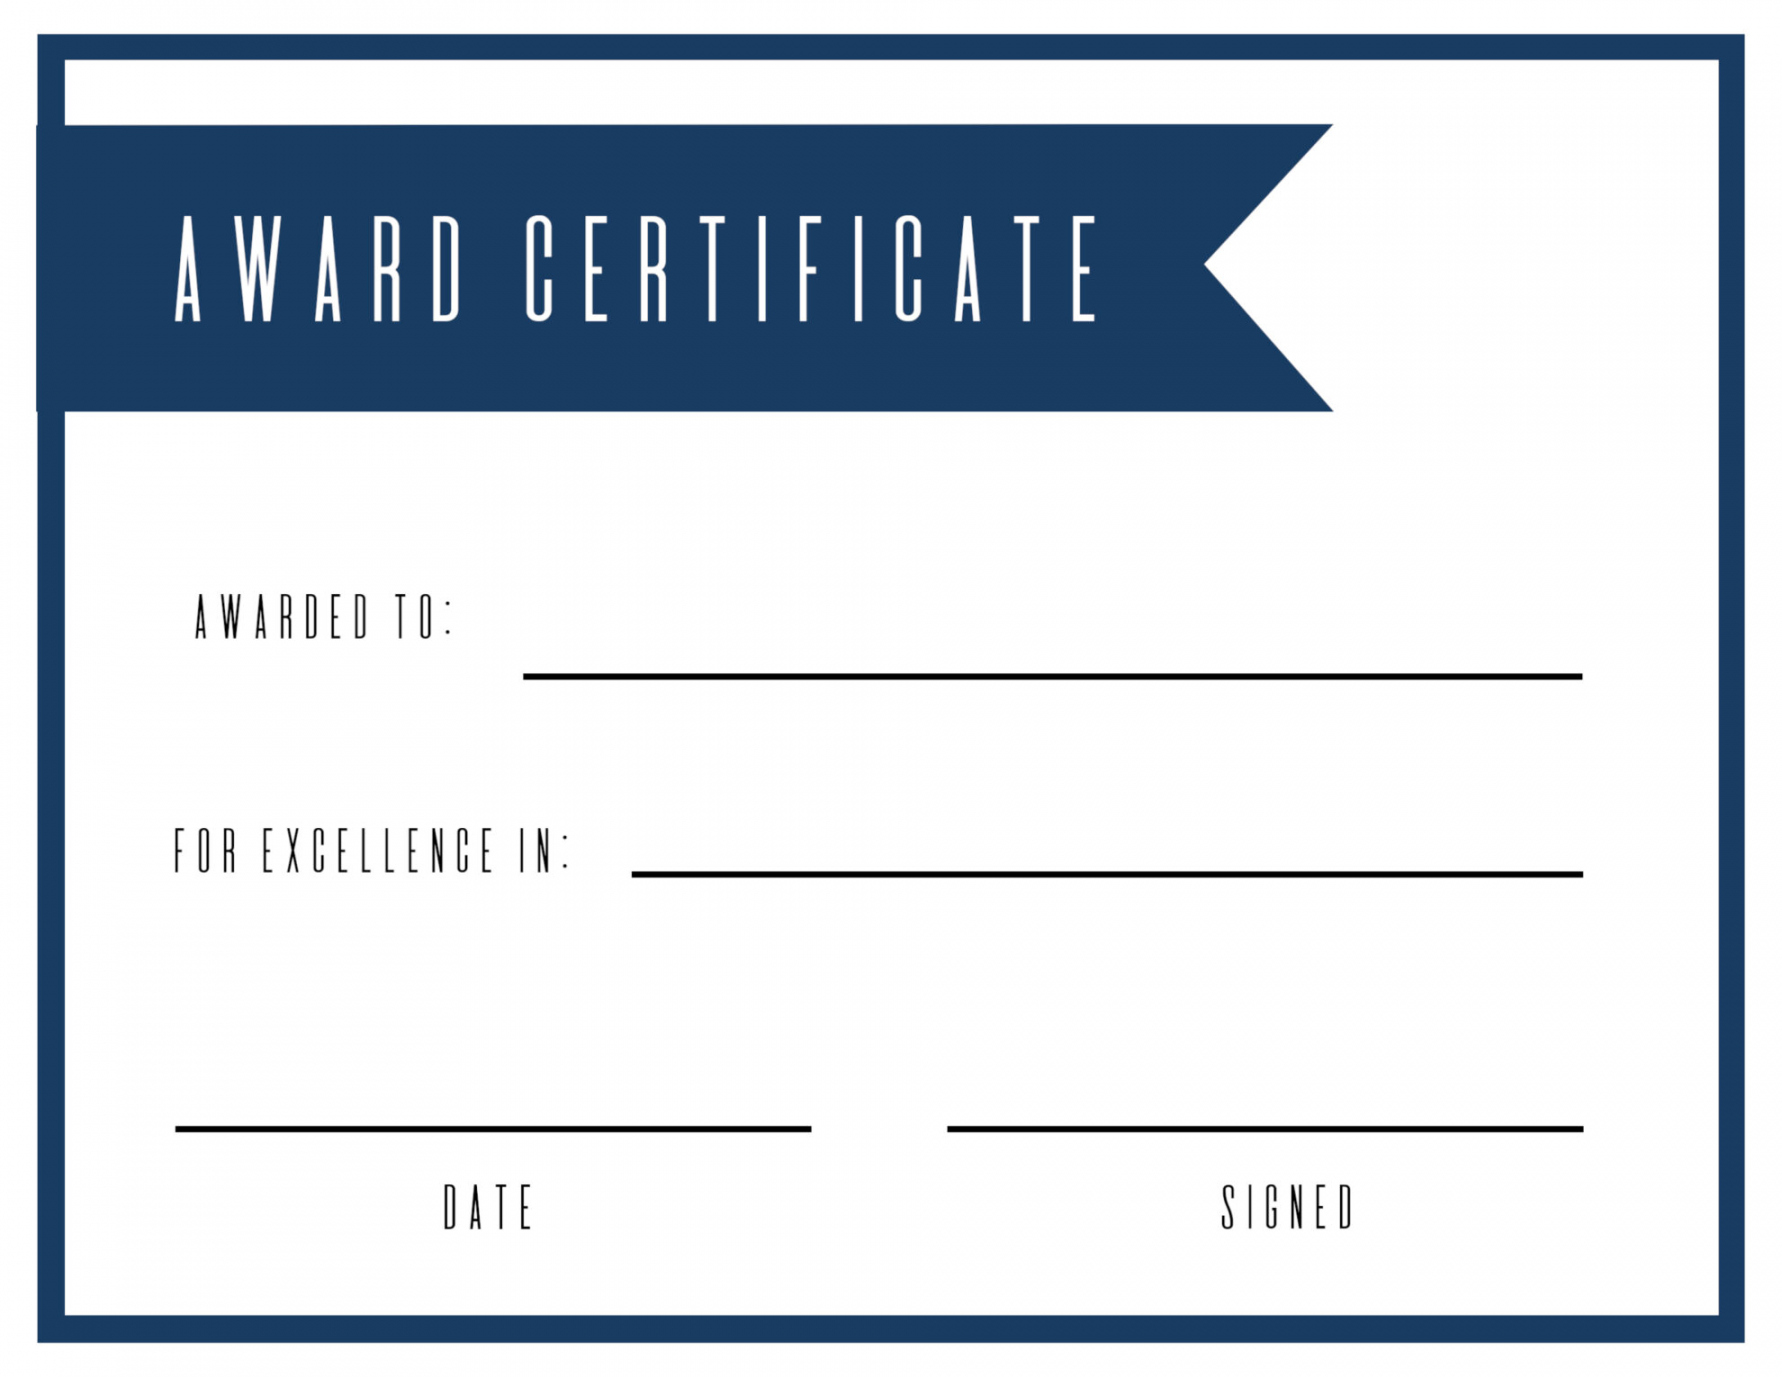 Free Printable Certificates And Awards - Printable - Free Printable Award Certificate Template - Paper Trail Design